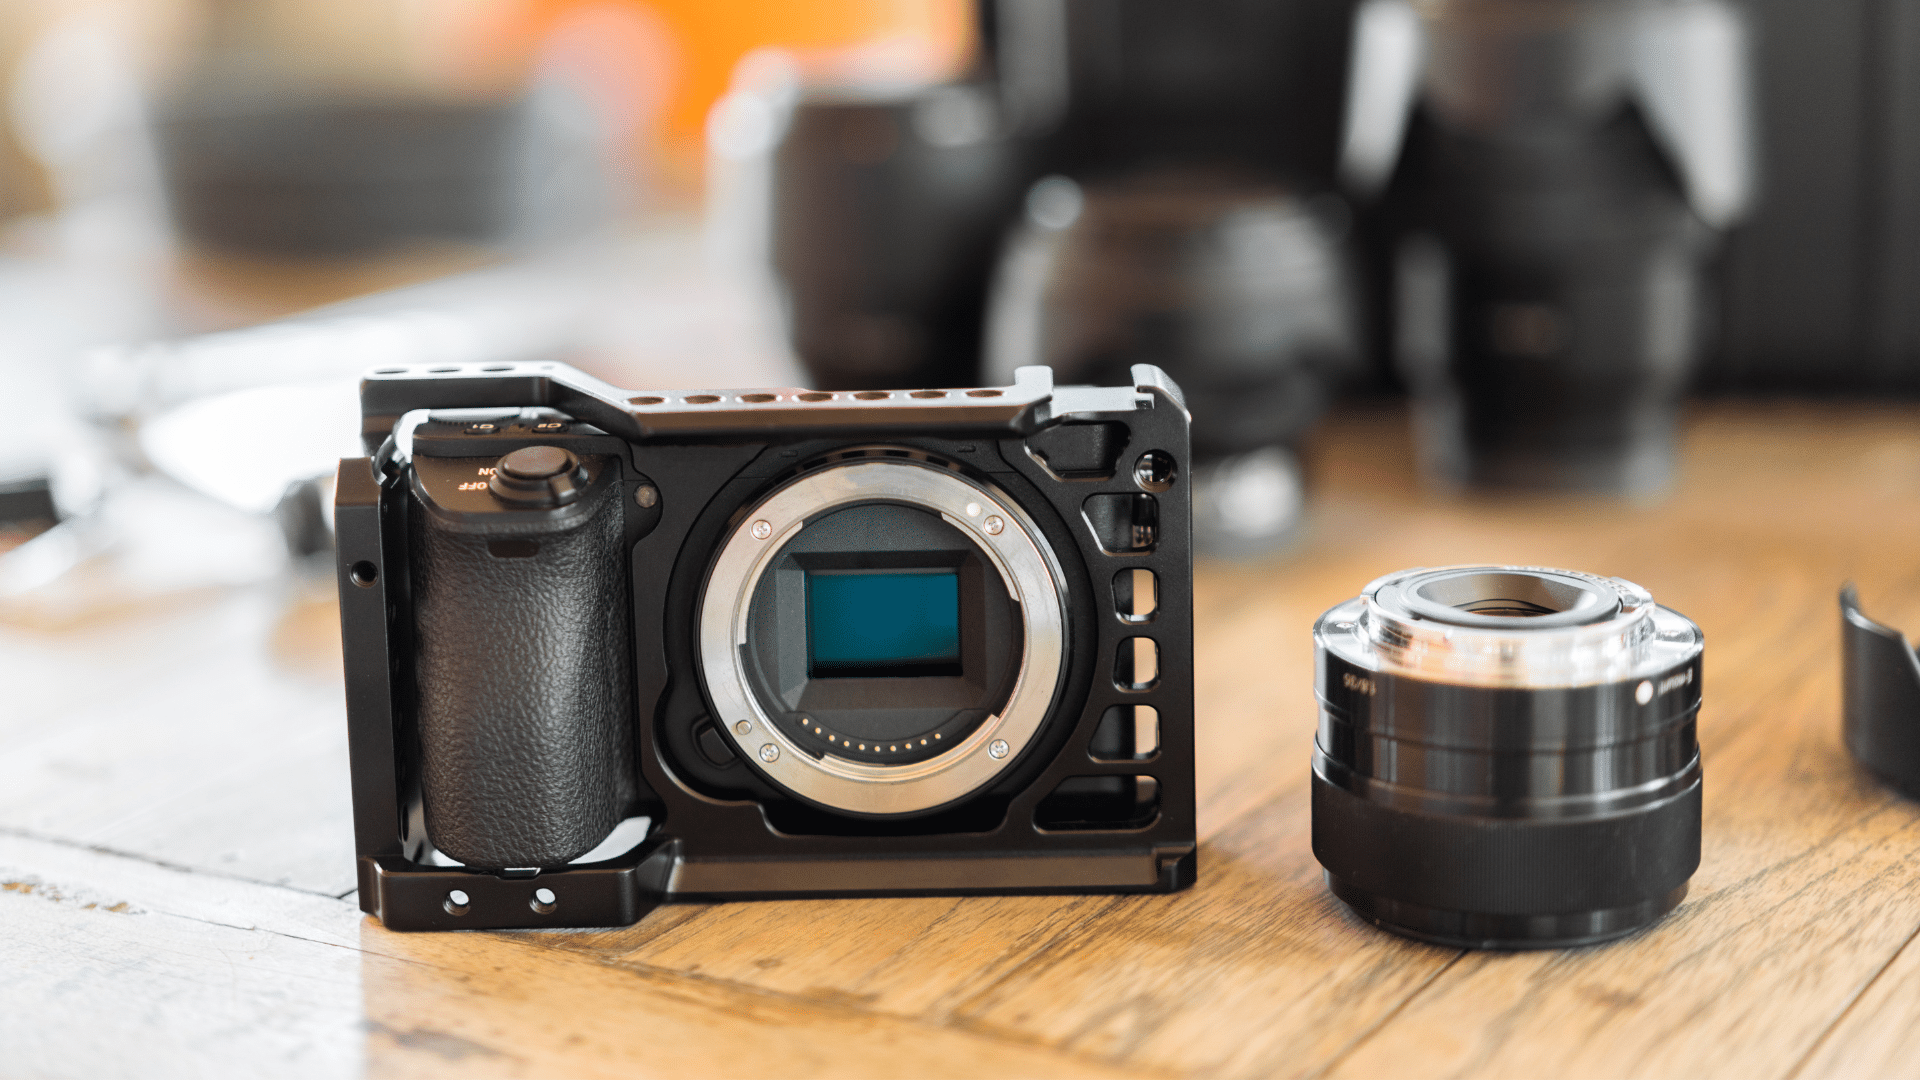 A mirrorless camera with interchangeable lens